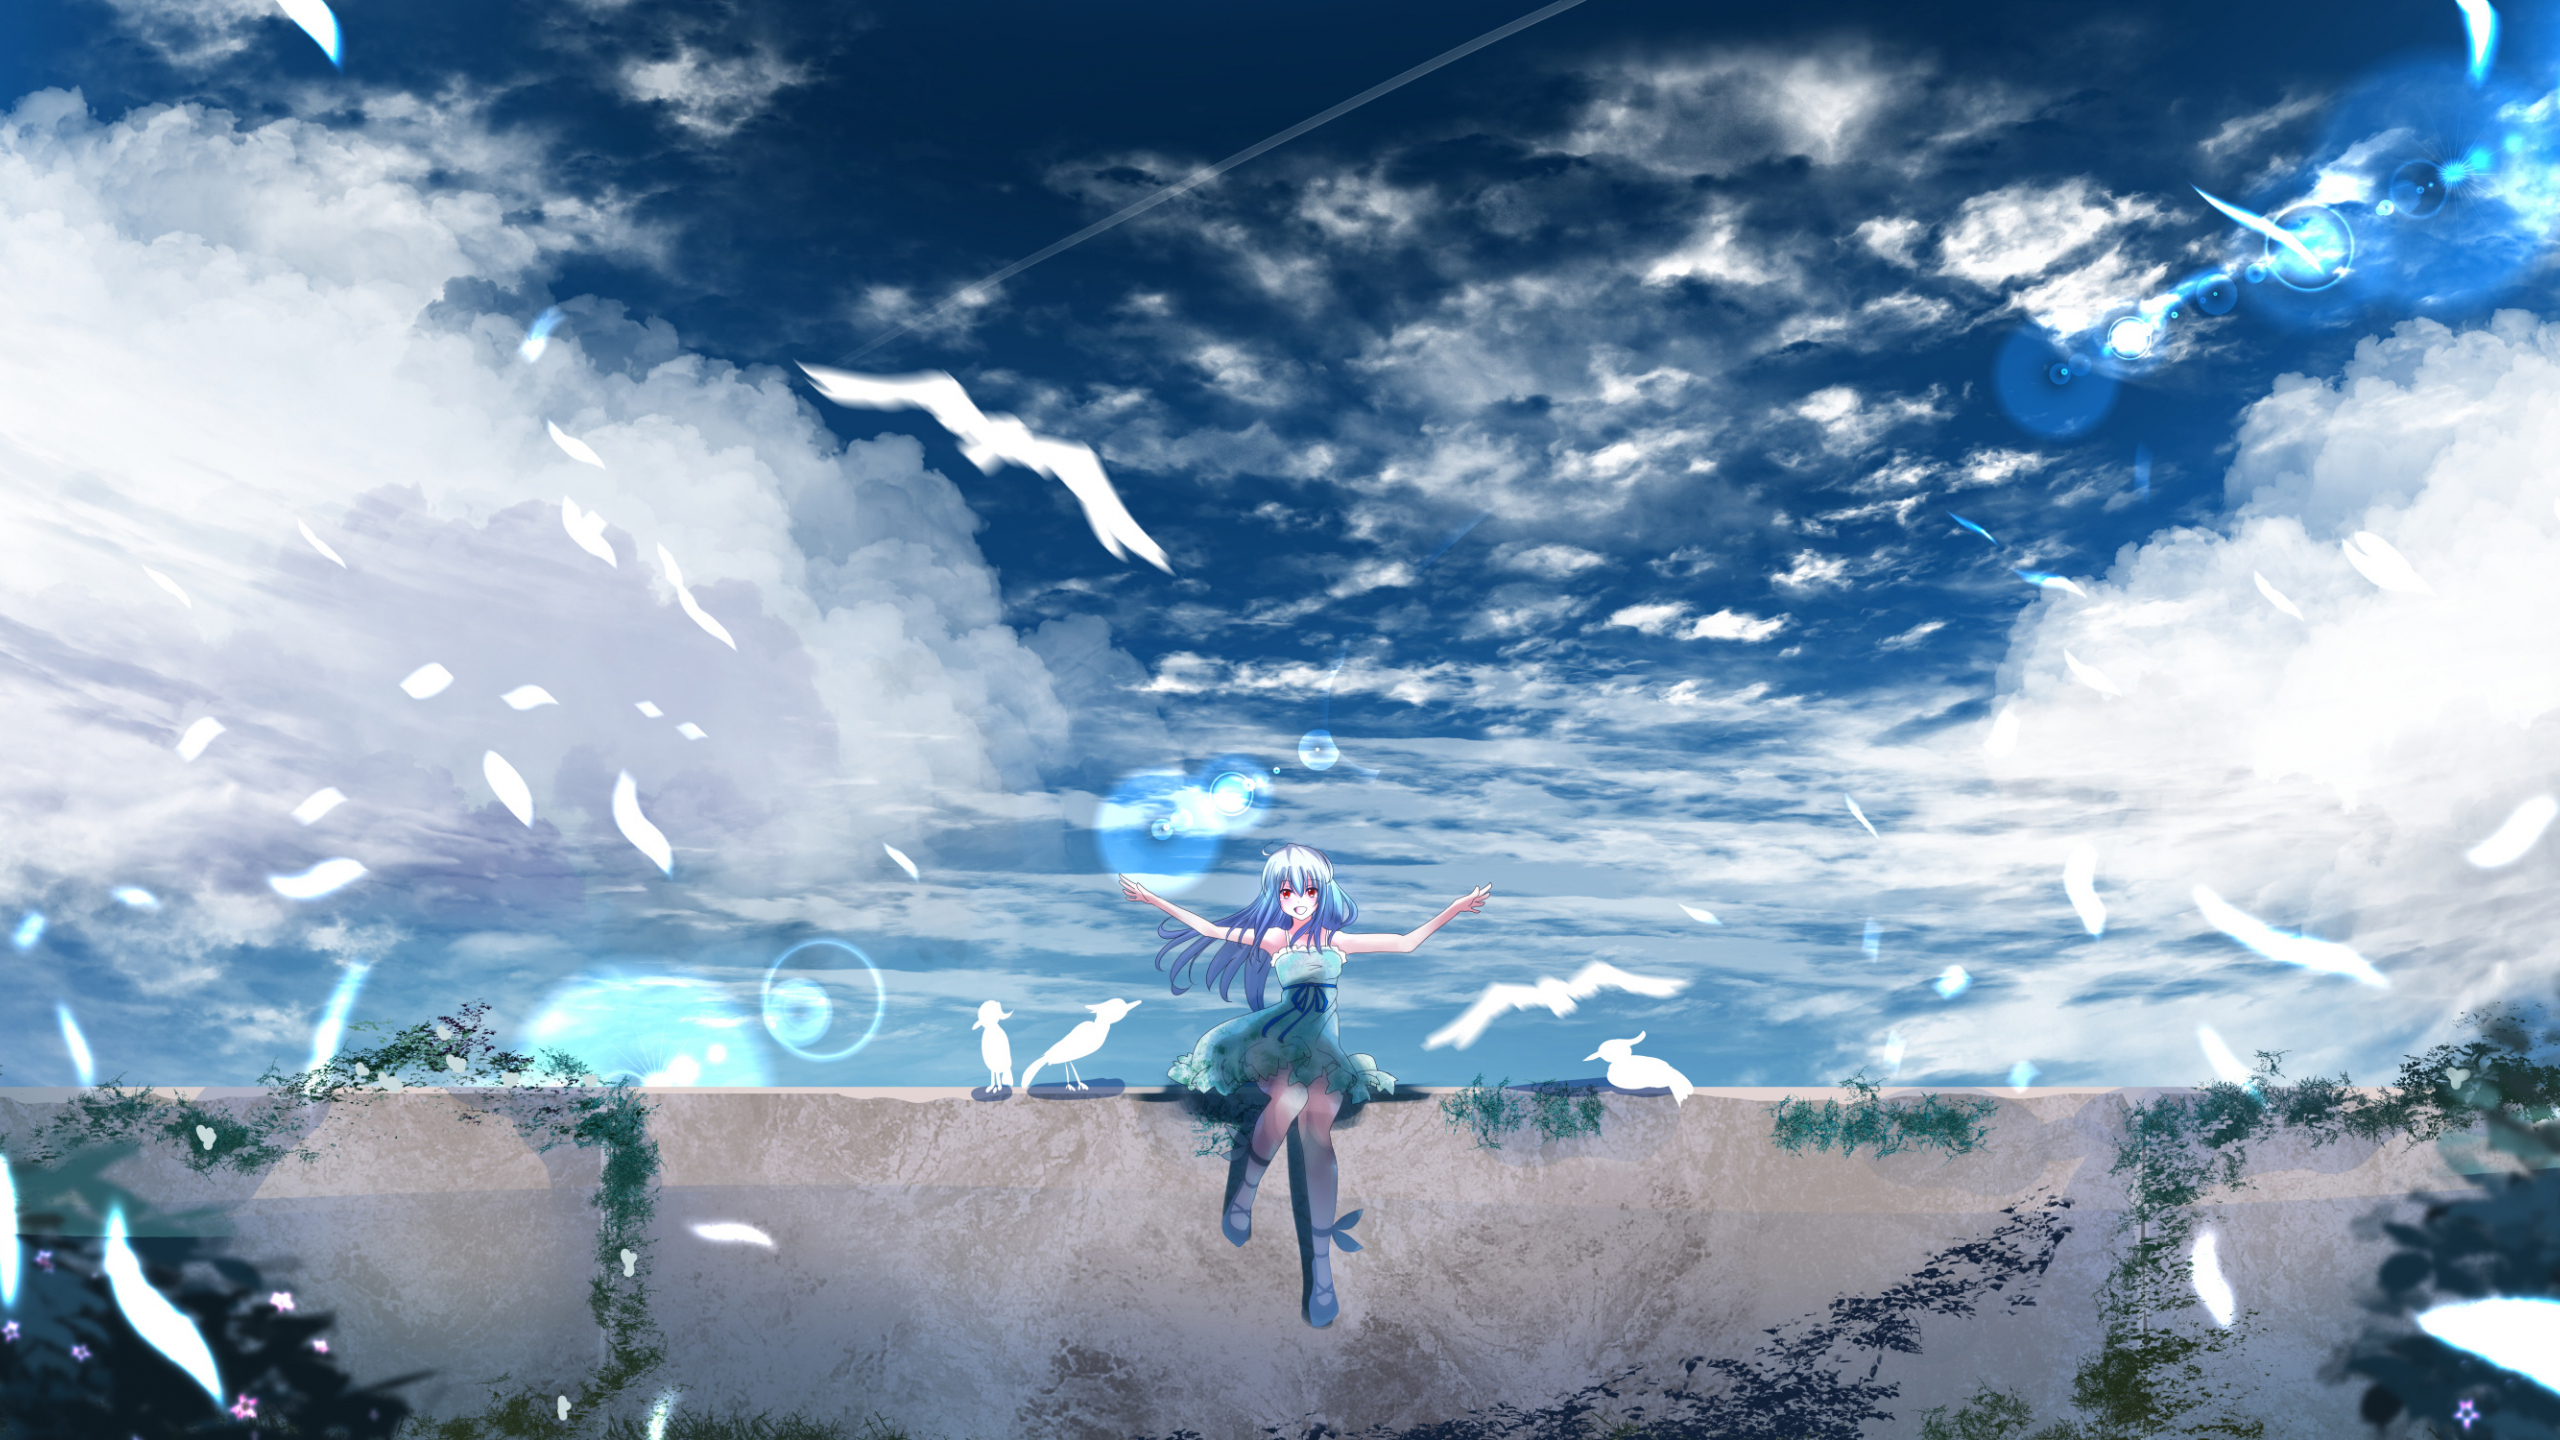 Download wallpaper x beautiful scenery anime outdoor anime girl dual wide x hd background